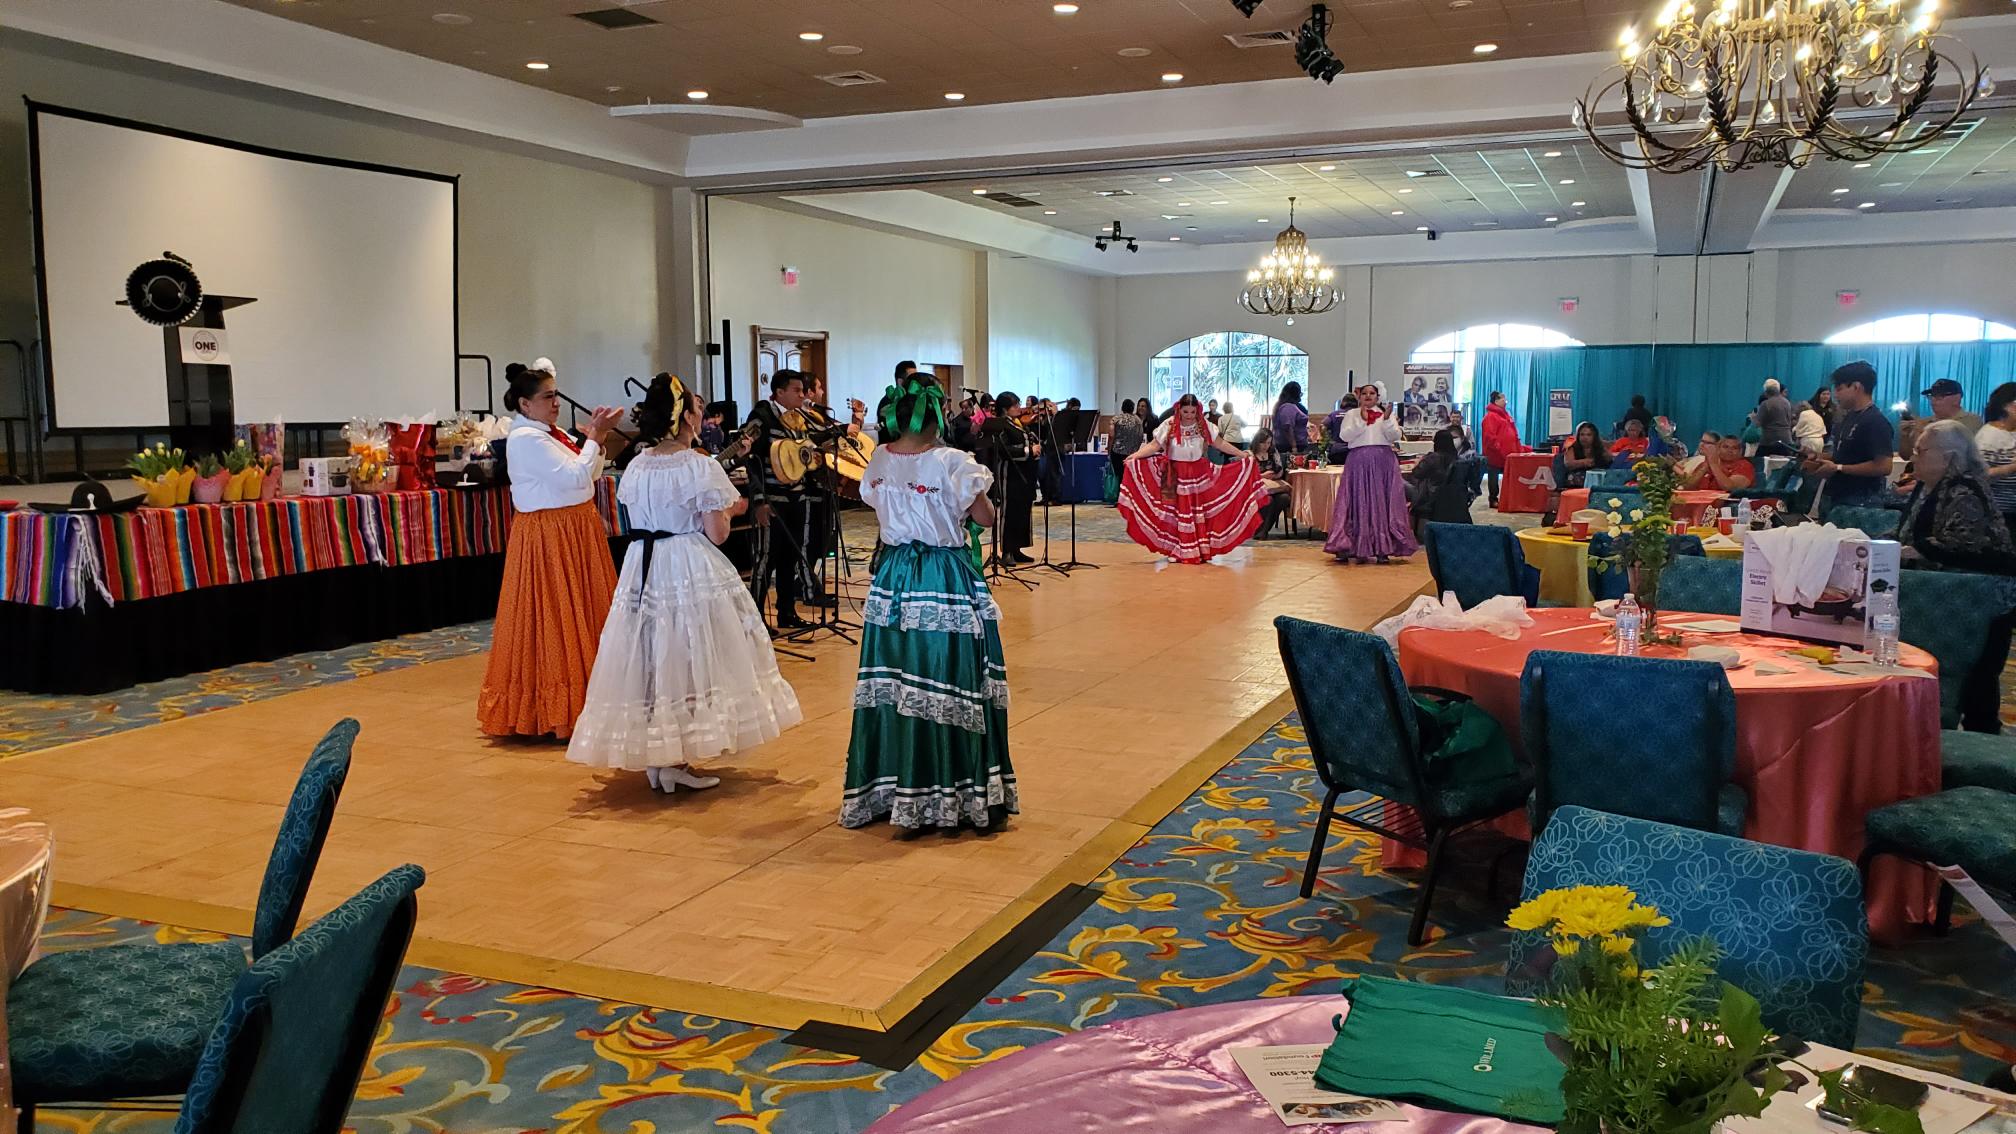 In a conference room, there are several female dancers with the folklore Mexican wardrobe.